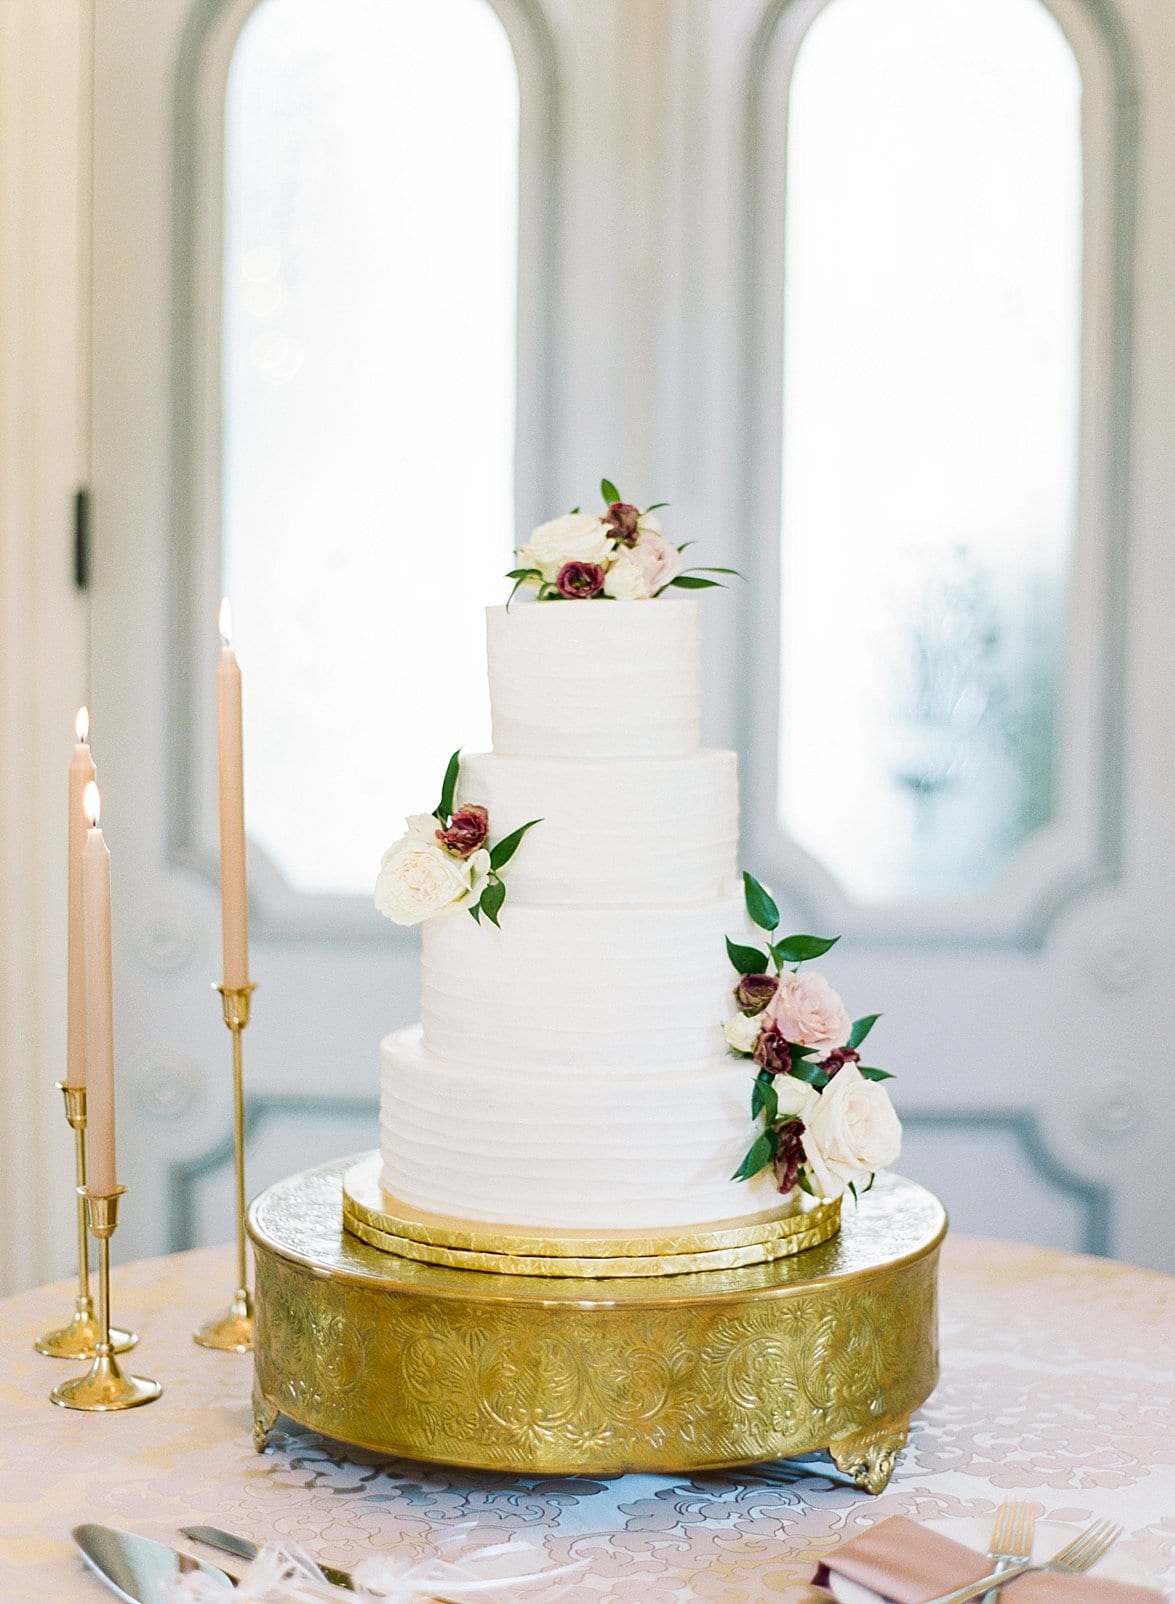 Edible Art white four tier wedding cake on a gold cake stand and decorated with fresh florals photo